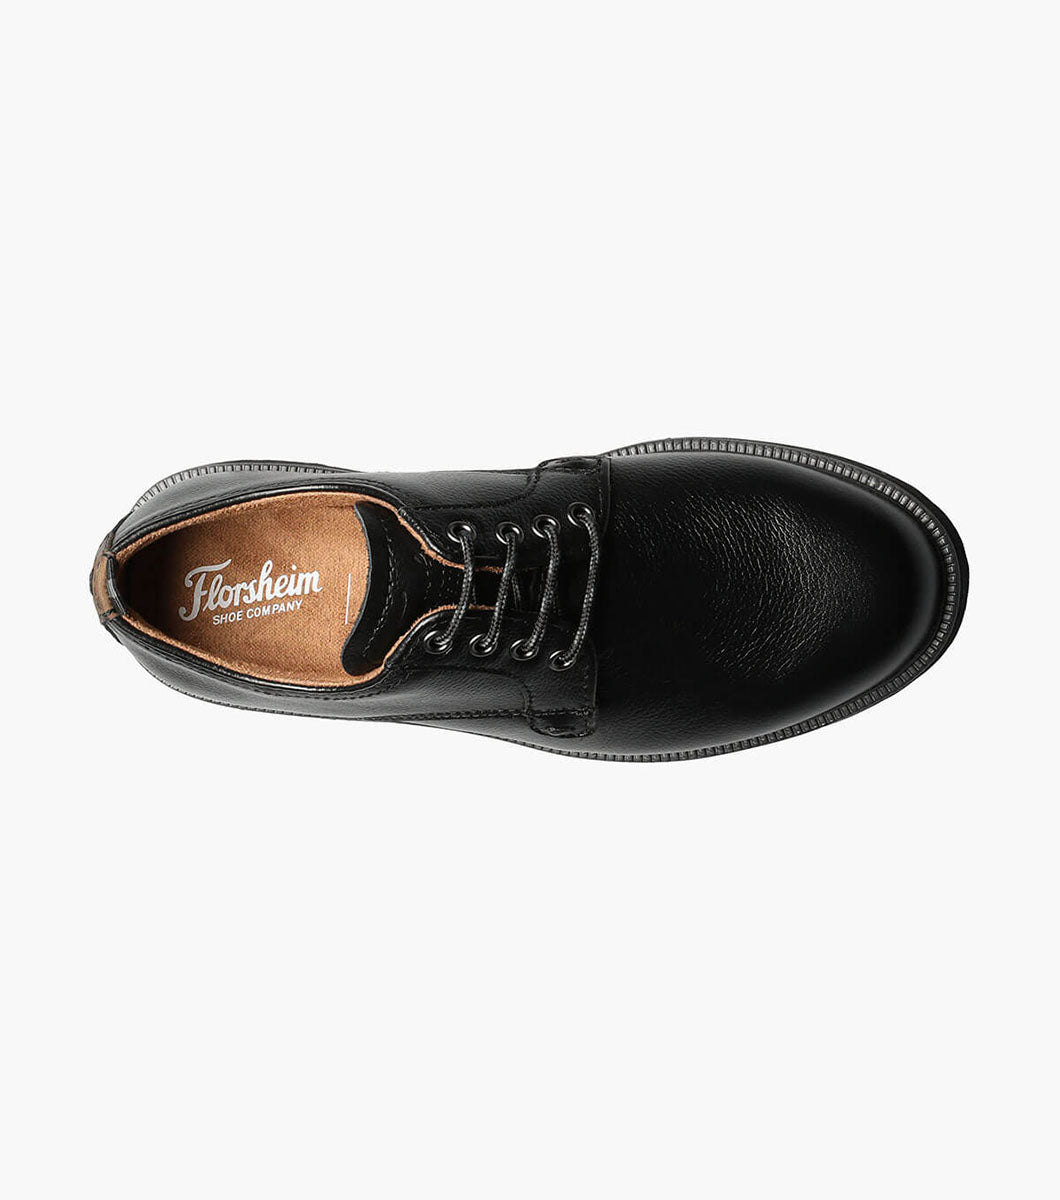 The athletic inspired sole of the Florsheim Supacush Plain Toe Oxford, Jr. gives it a casual vibe that is enhanced by the relaxed look of the upper. The stylish design is complemented by features like breathable, moisture-wicking Suedetec linings and a slip-resistant, non-marking rubber sole.